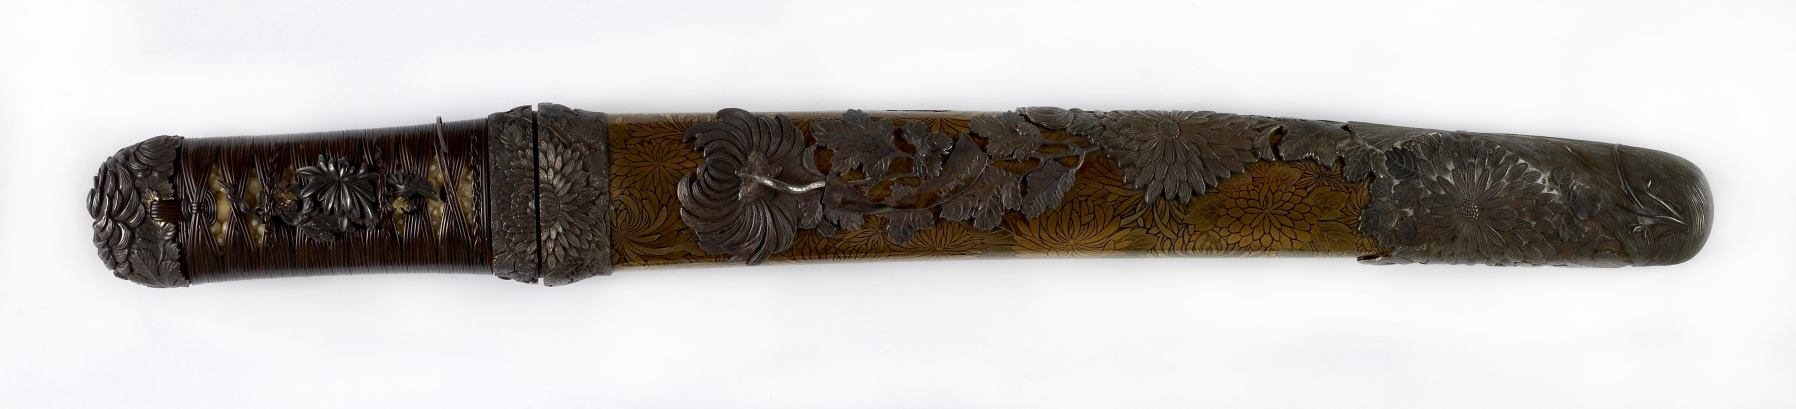 Image for Dagger (aikuchi) with gold lacquer saya decorated with outlined chrysanthemum clusters, silver chrysanthemums (includes 51.1278.1-51.1278.2)